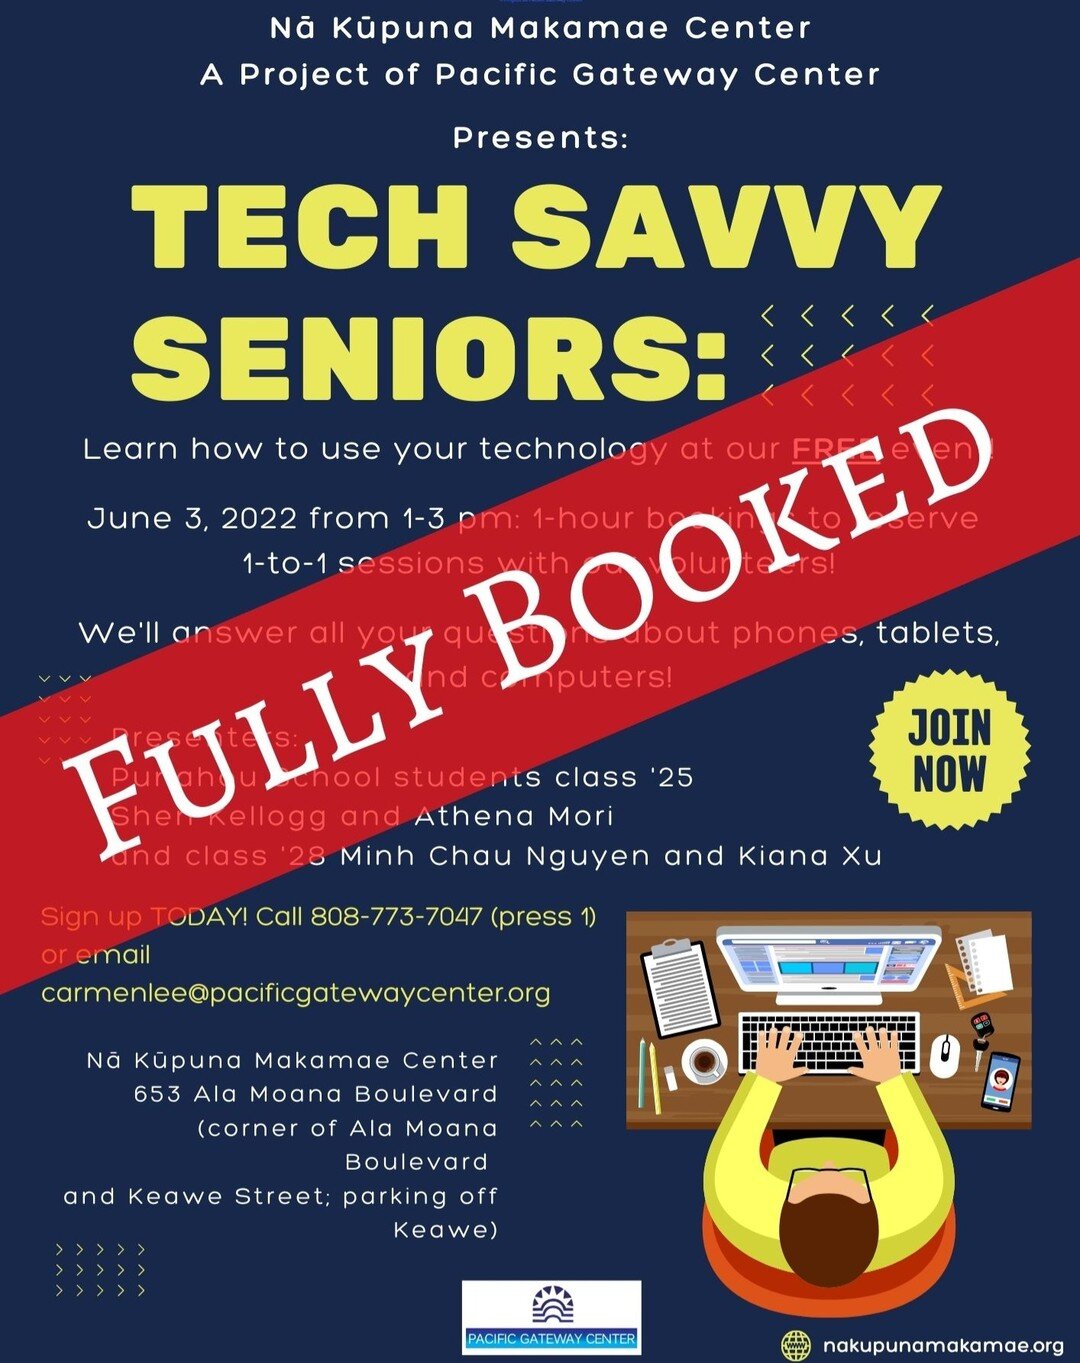 Mahalo everyone! Tech Savvy Seniors for this Friday (6/3/22) is fully booked. Please keep an eye out for our next Tech-Savvy course.

We still have spots available for the Watercolor Workshop from 3-4pm. Click on the flyer on our website for more inf